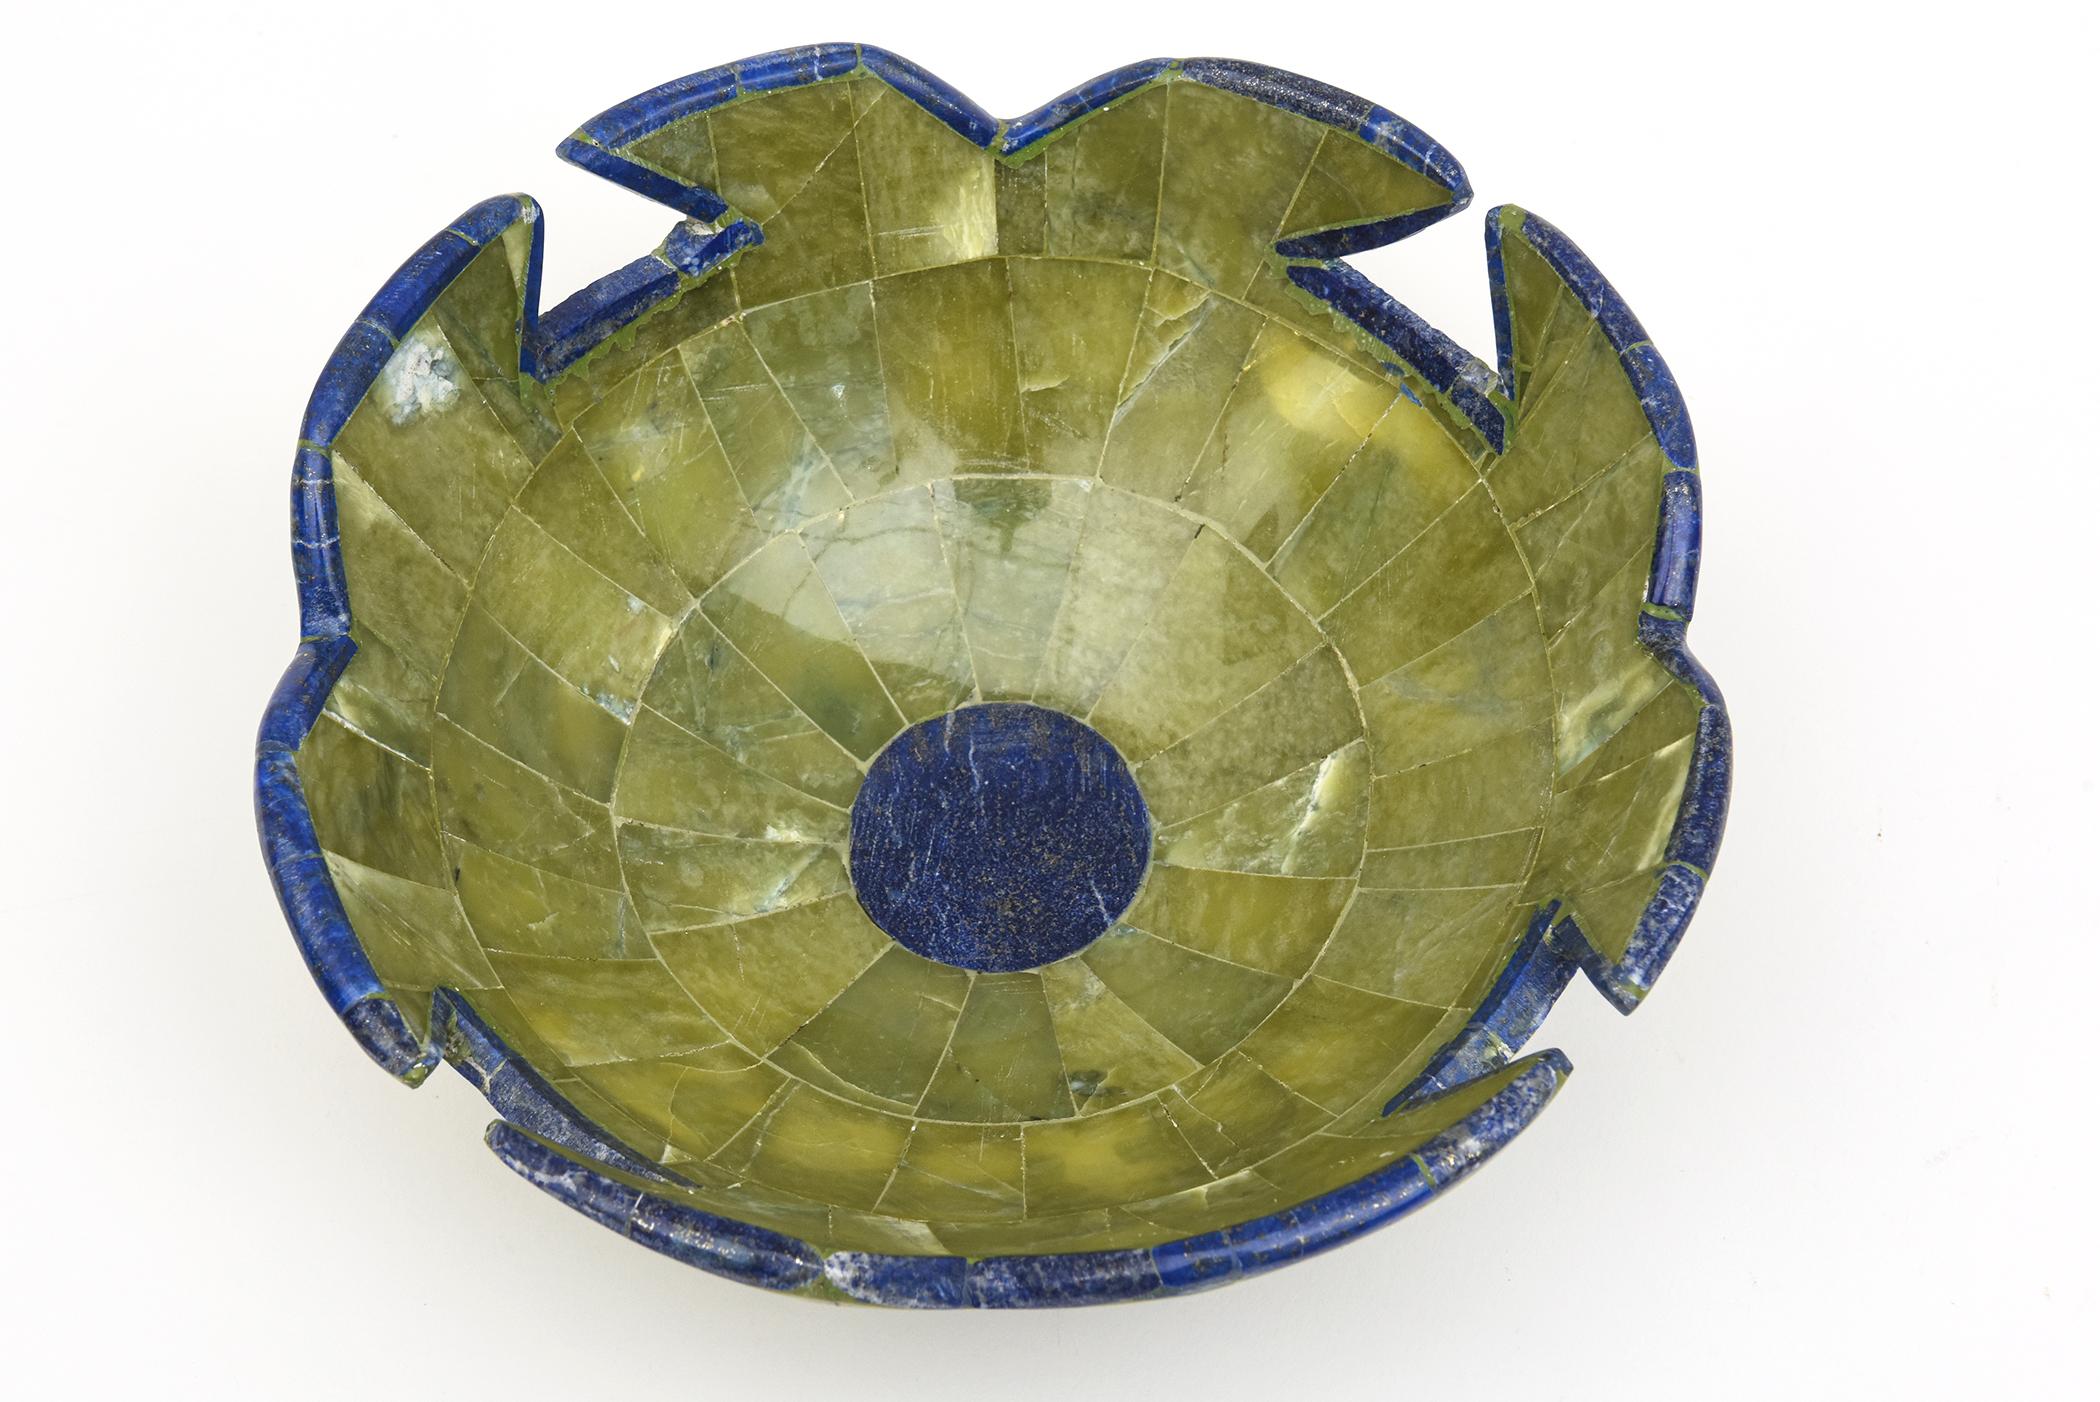 The beautiful combination in this scalloped bowl of the colors of the carved green stone set against the lapis lazuli blue is a knock out! From the 1980s. Great as a decorative bowl, desk accessory or for serving. The colors together are offset by